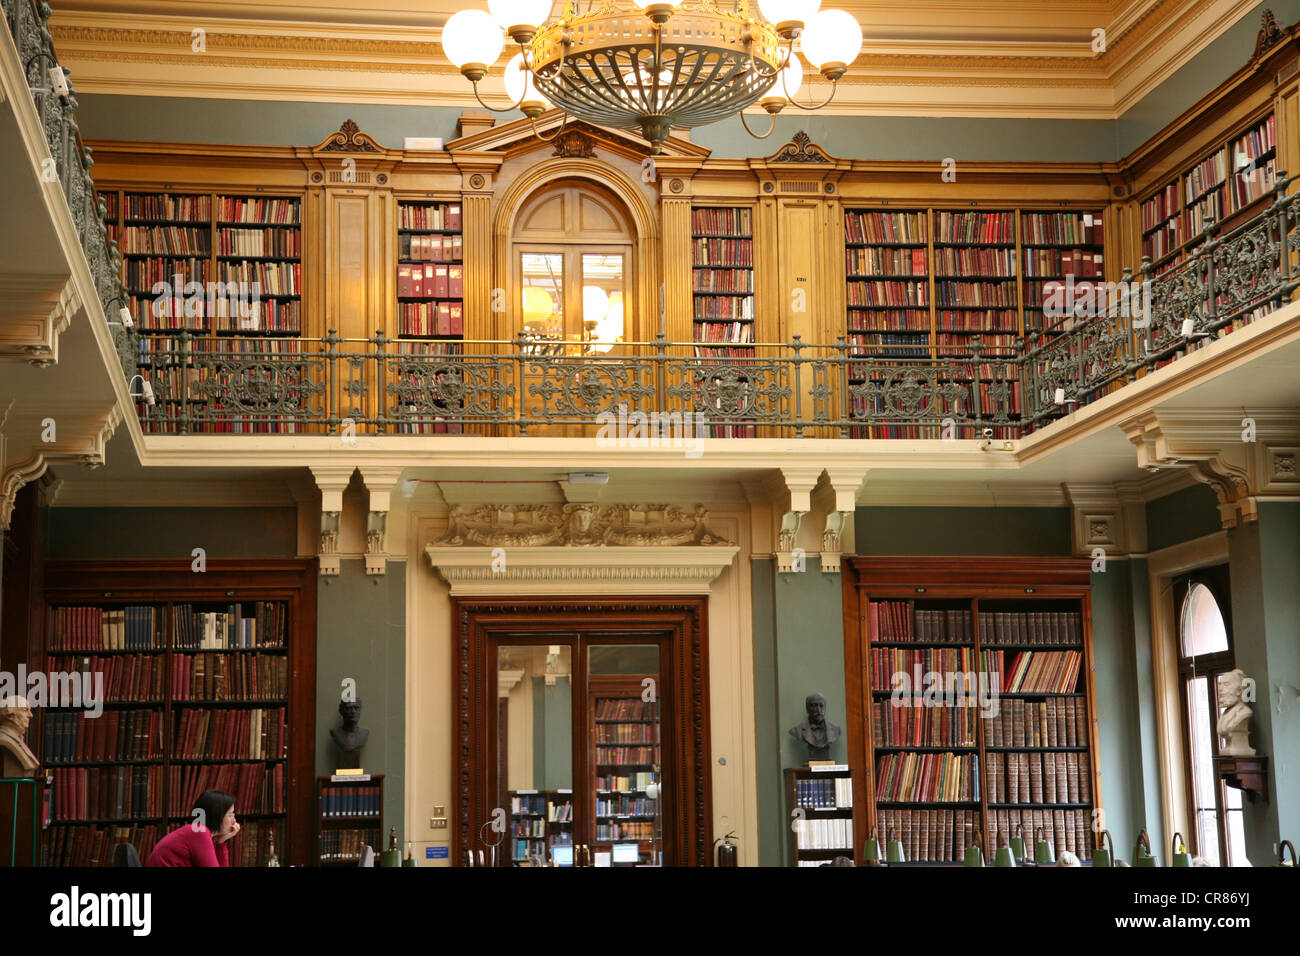 Library of Victoria and Albert Museum, London Stock Photo - Alamy